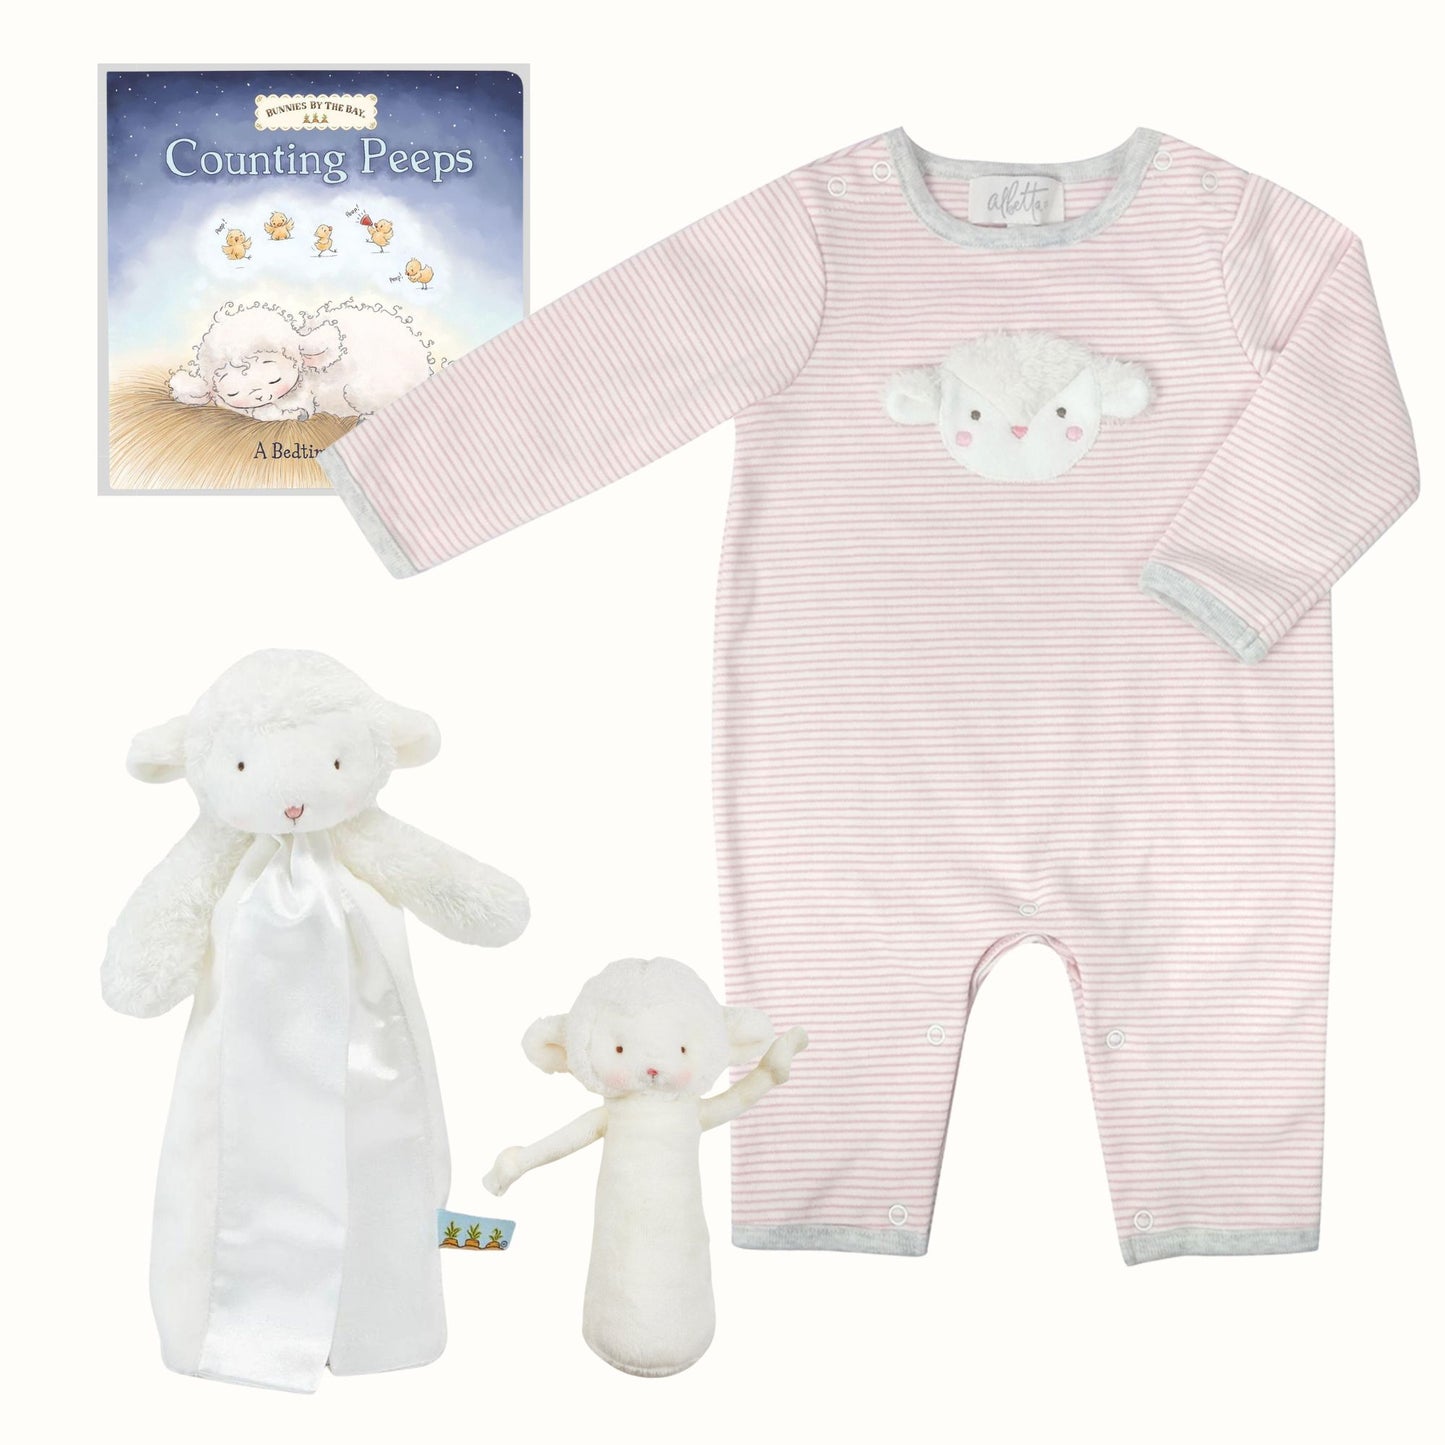 Counting Peeps and Wearing Sheep Baby Gift Set